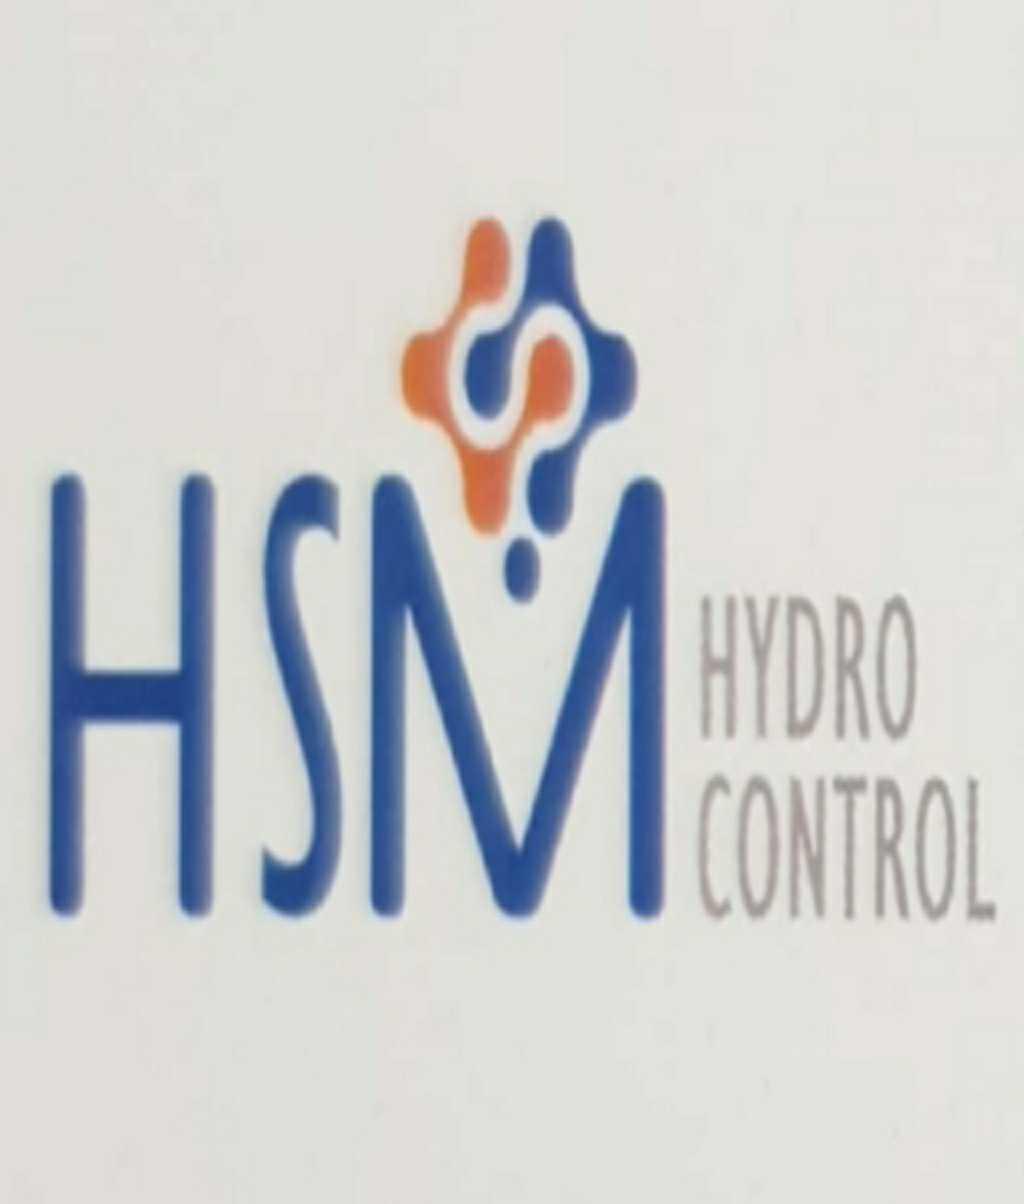 HSM HYDRO CONTROL PRIVATE LIMITED